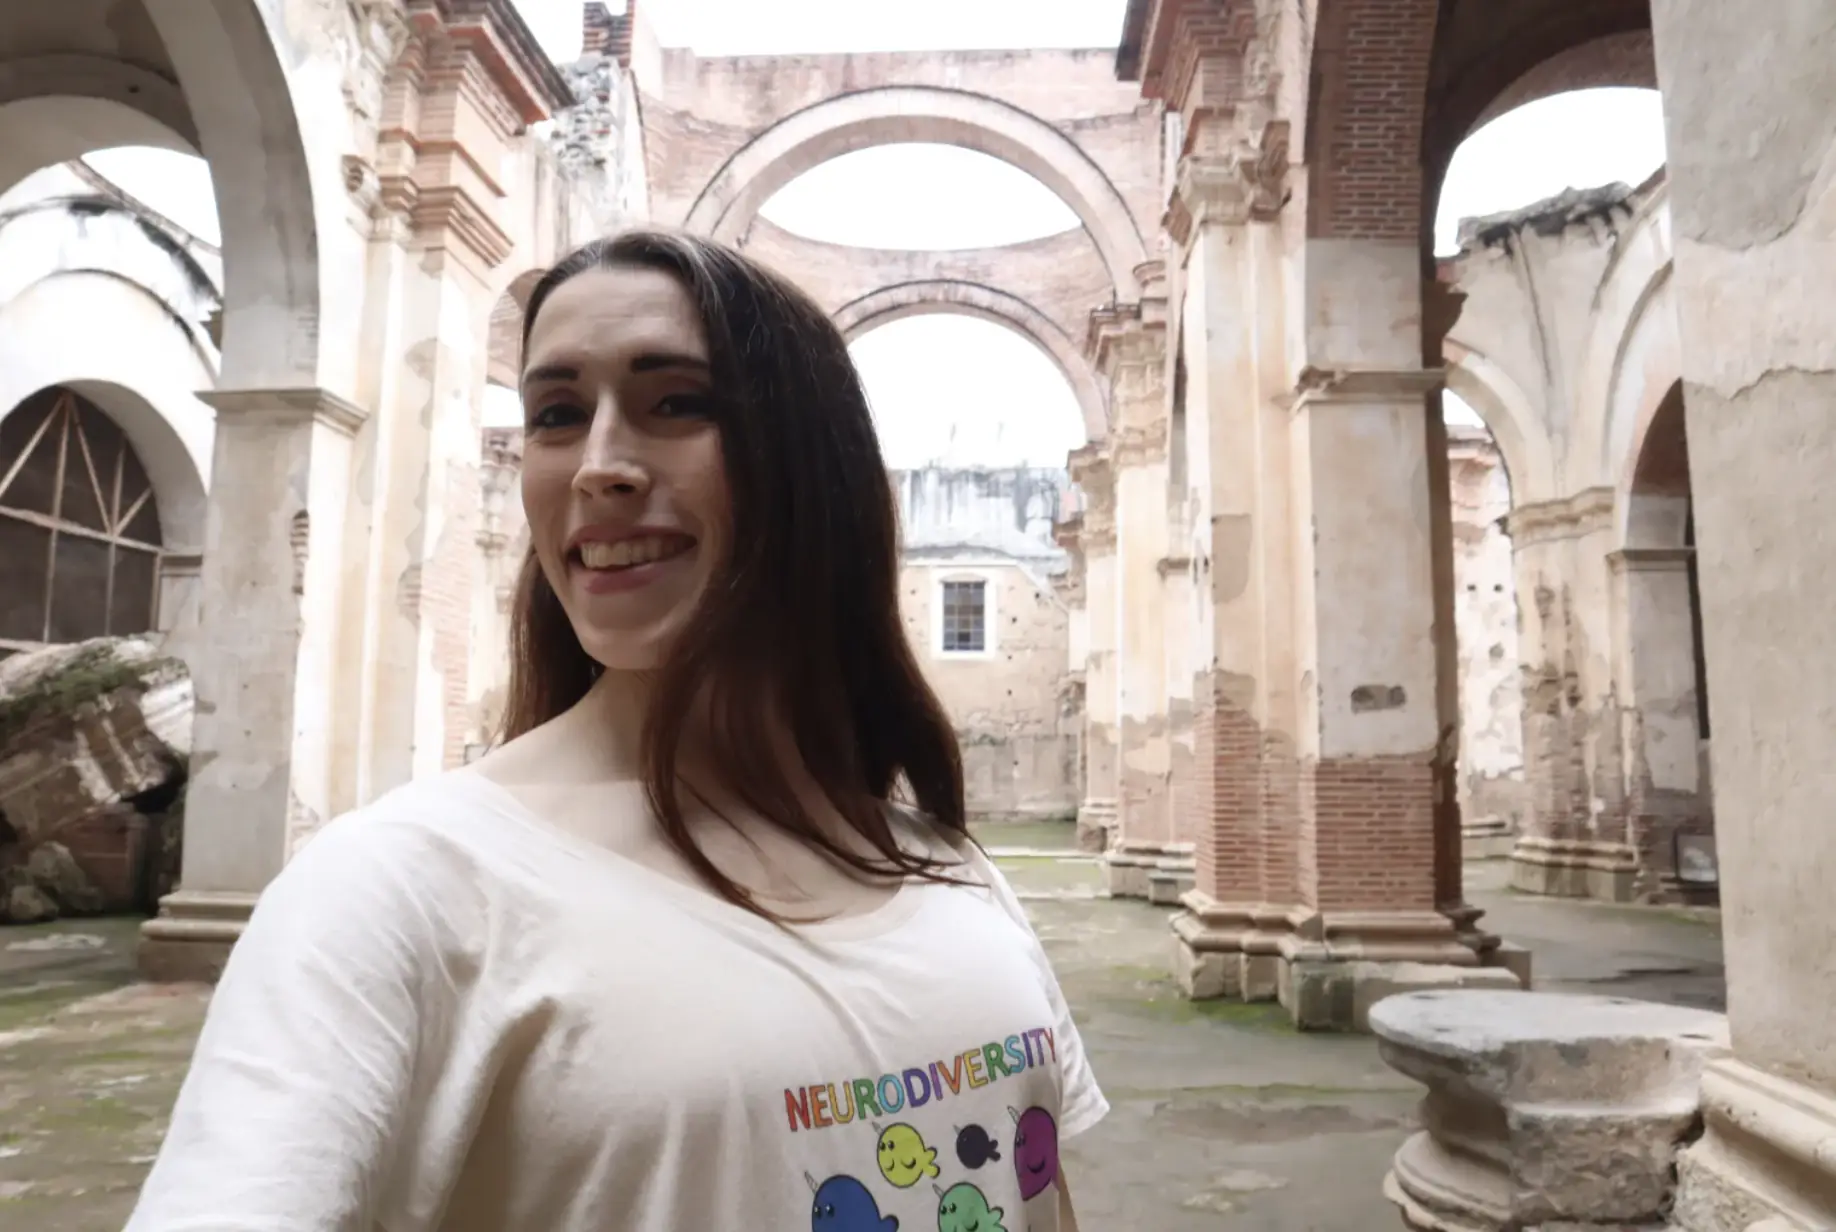 arched ruins of Spanish Catholic church in original colonial capital of Guatemala in Antigua. Smiling Latina woman Kayley Whalen is wearing a "Neurodiversity is for Everyone" t-shirt with the flappy narwhals created by the Ed Wiley Autism Acceptance Lending Library.